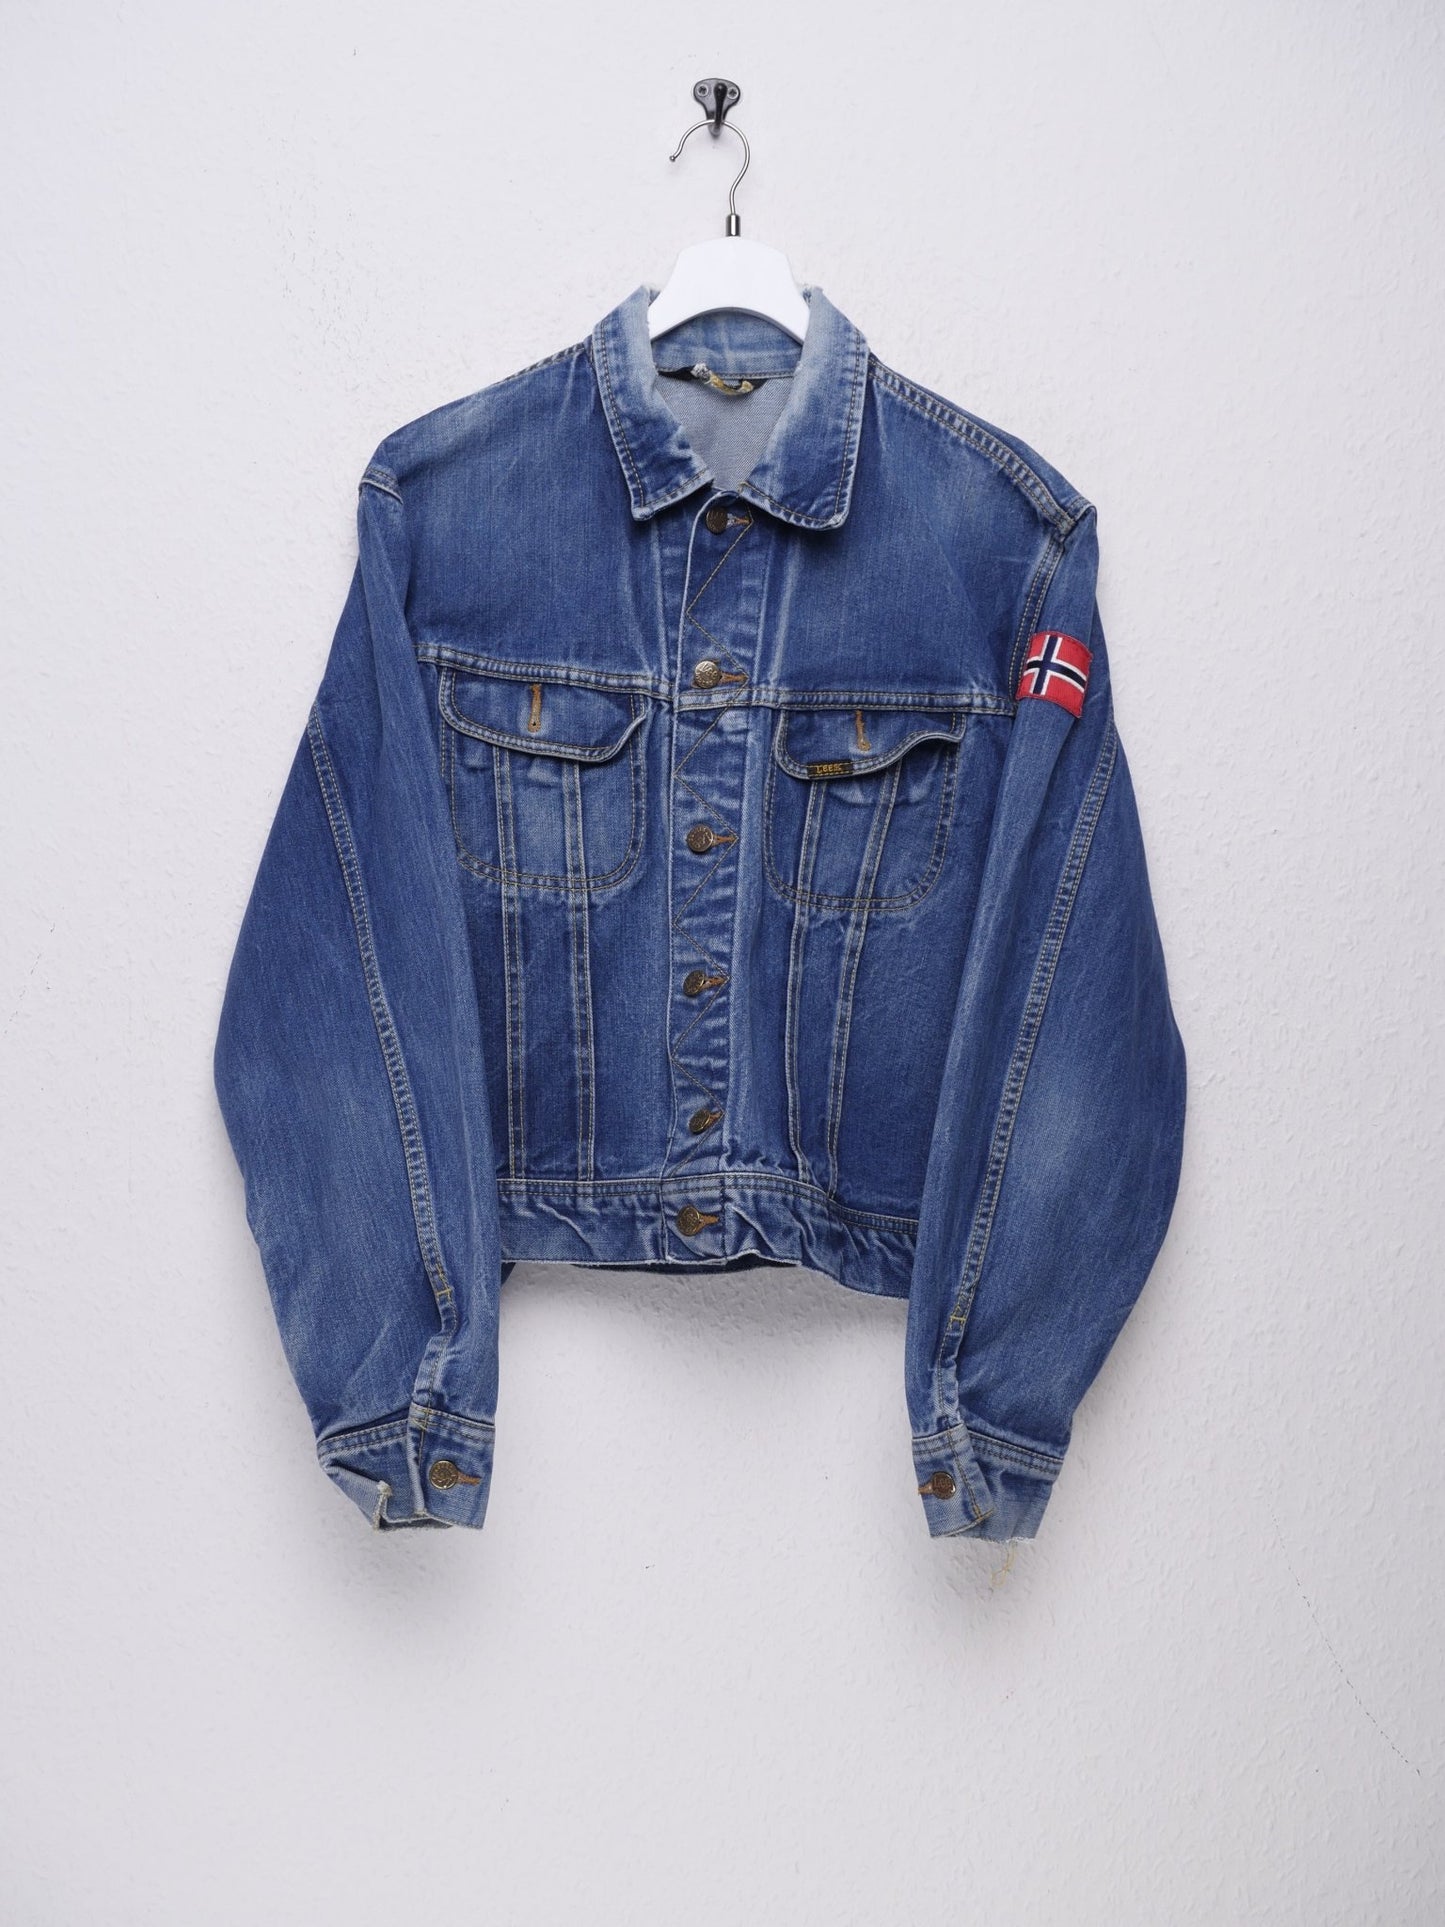 Lee embroidered Patch blue Denim Jacket - Peeces